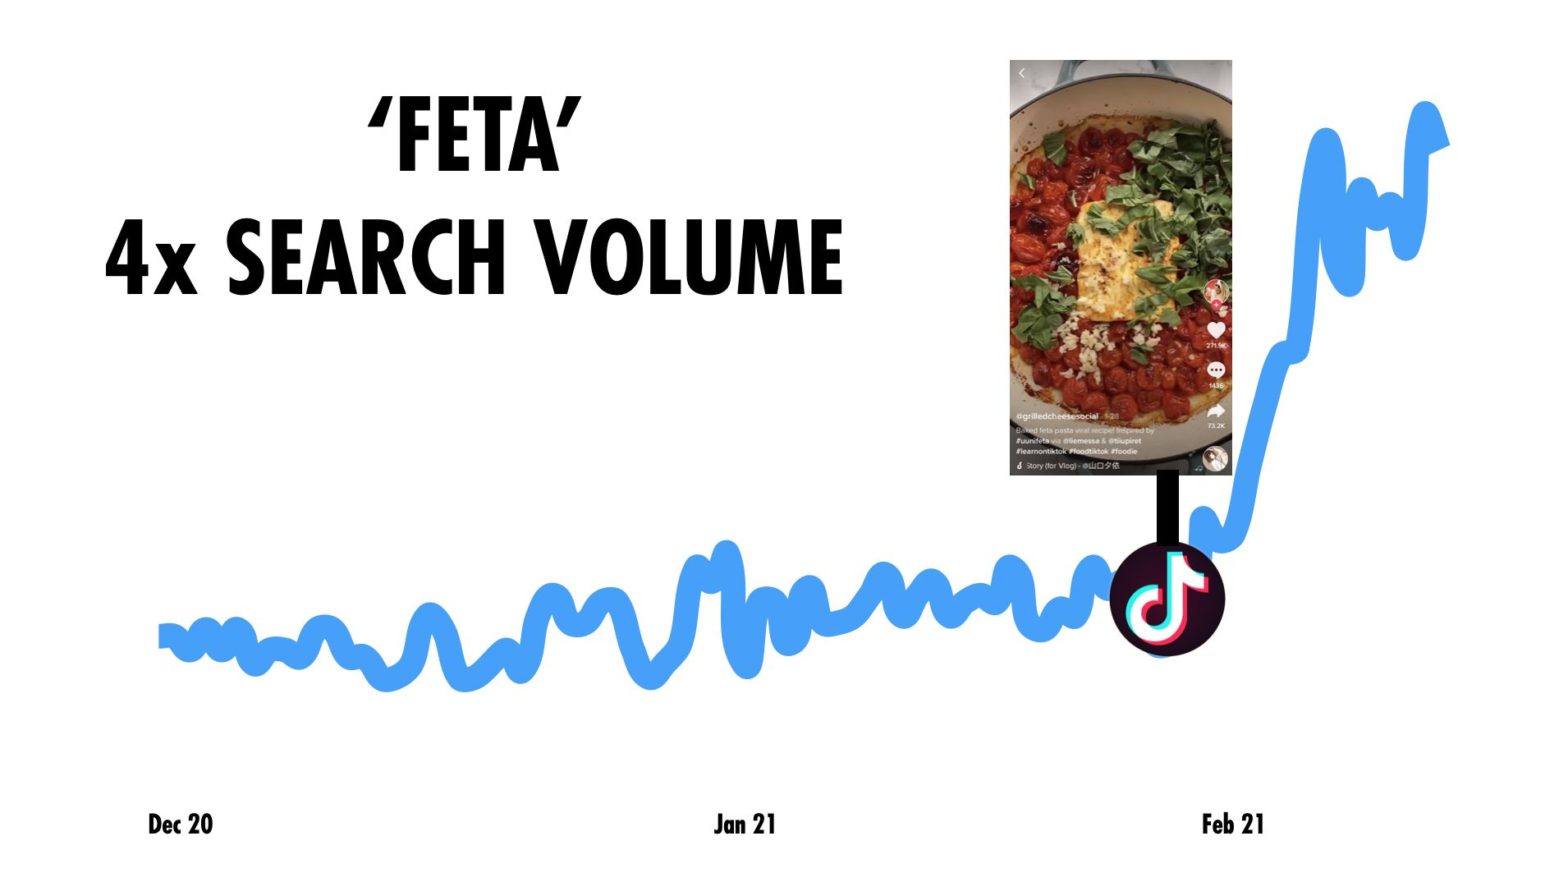 Why has ‘Feta’ search volume has increased 4x in the last two weeks?